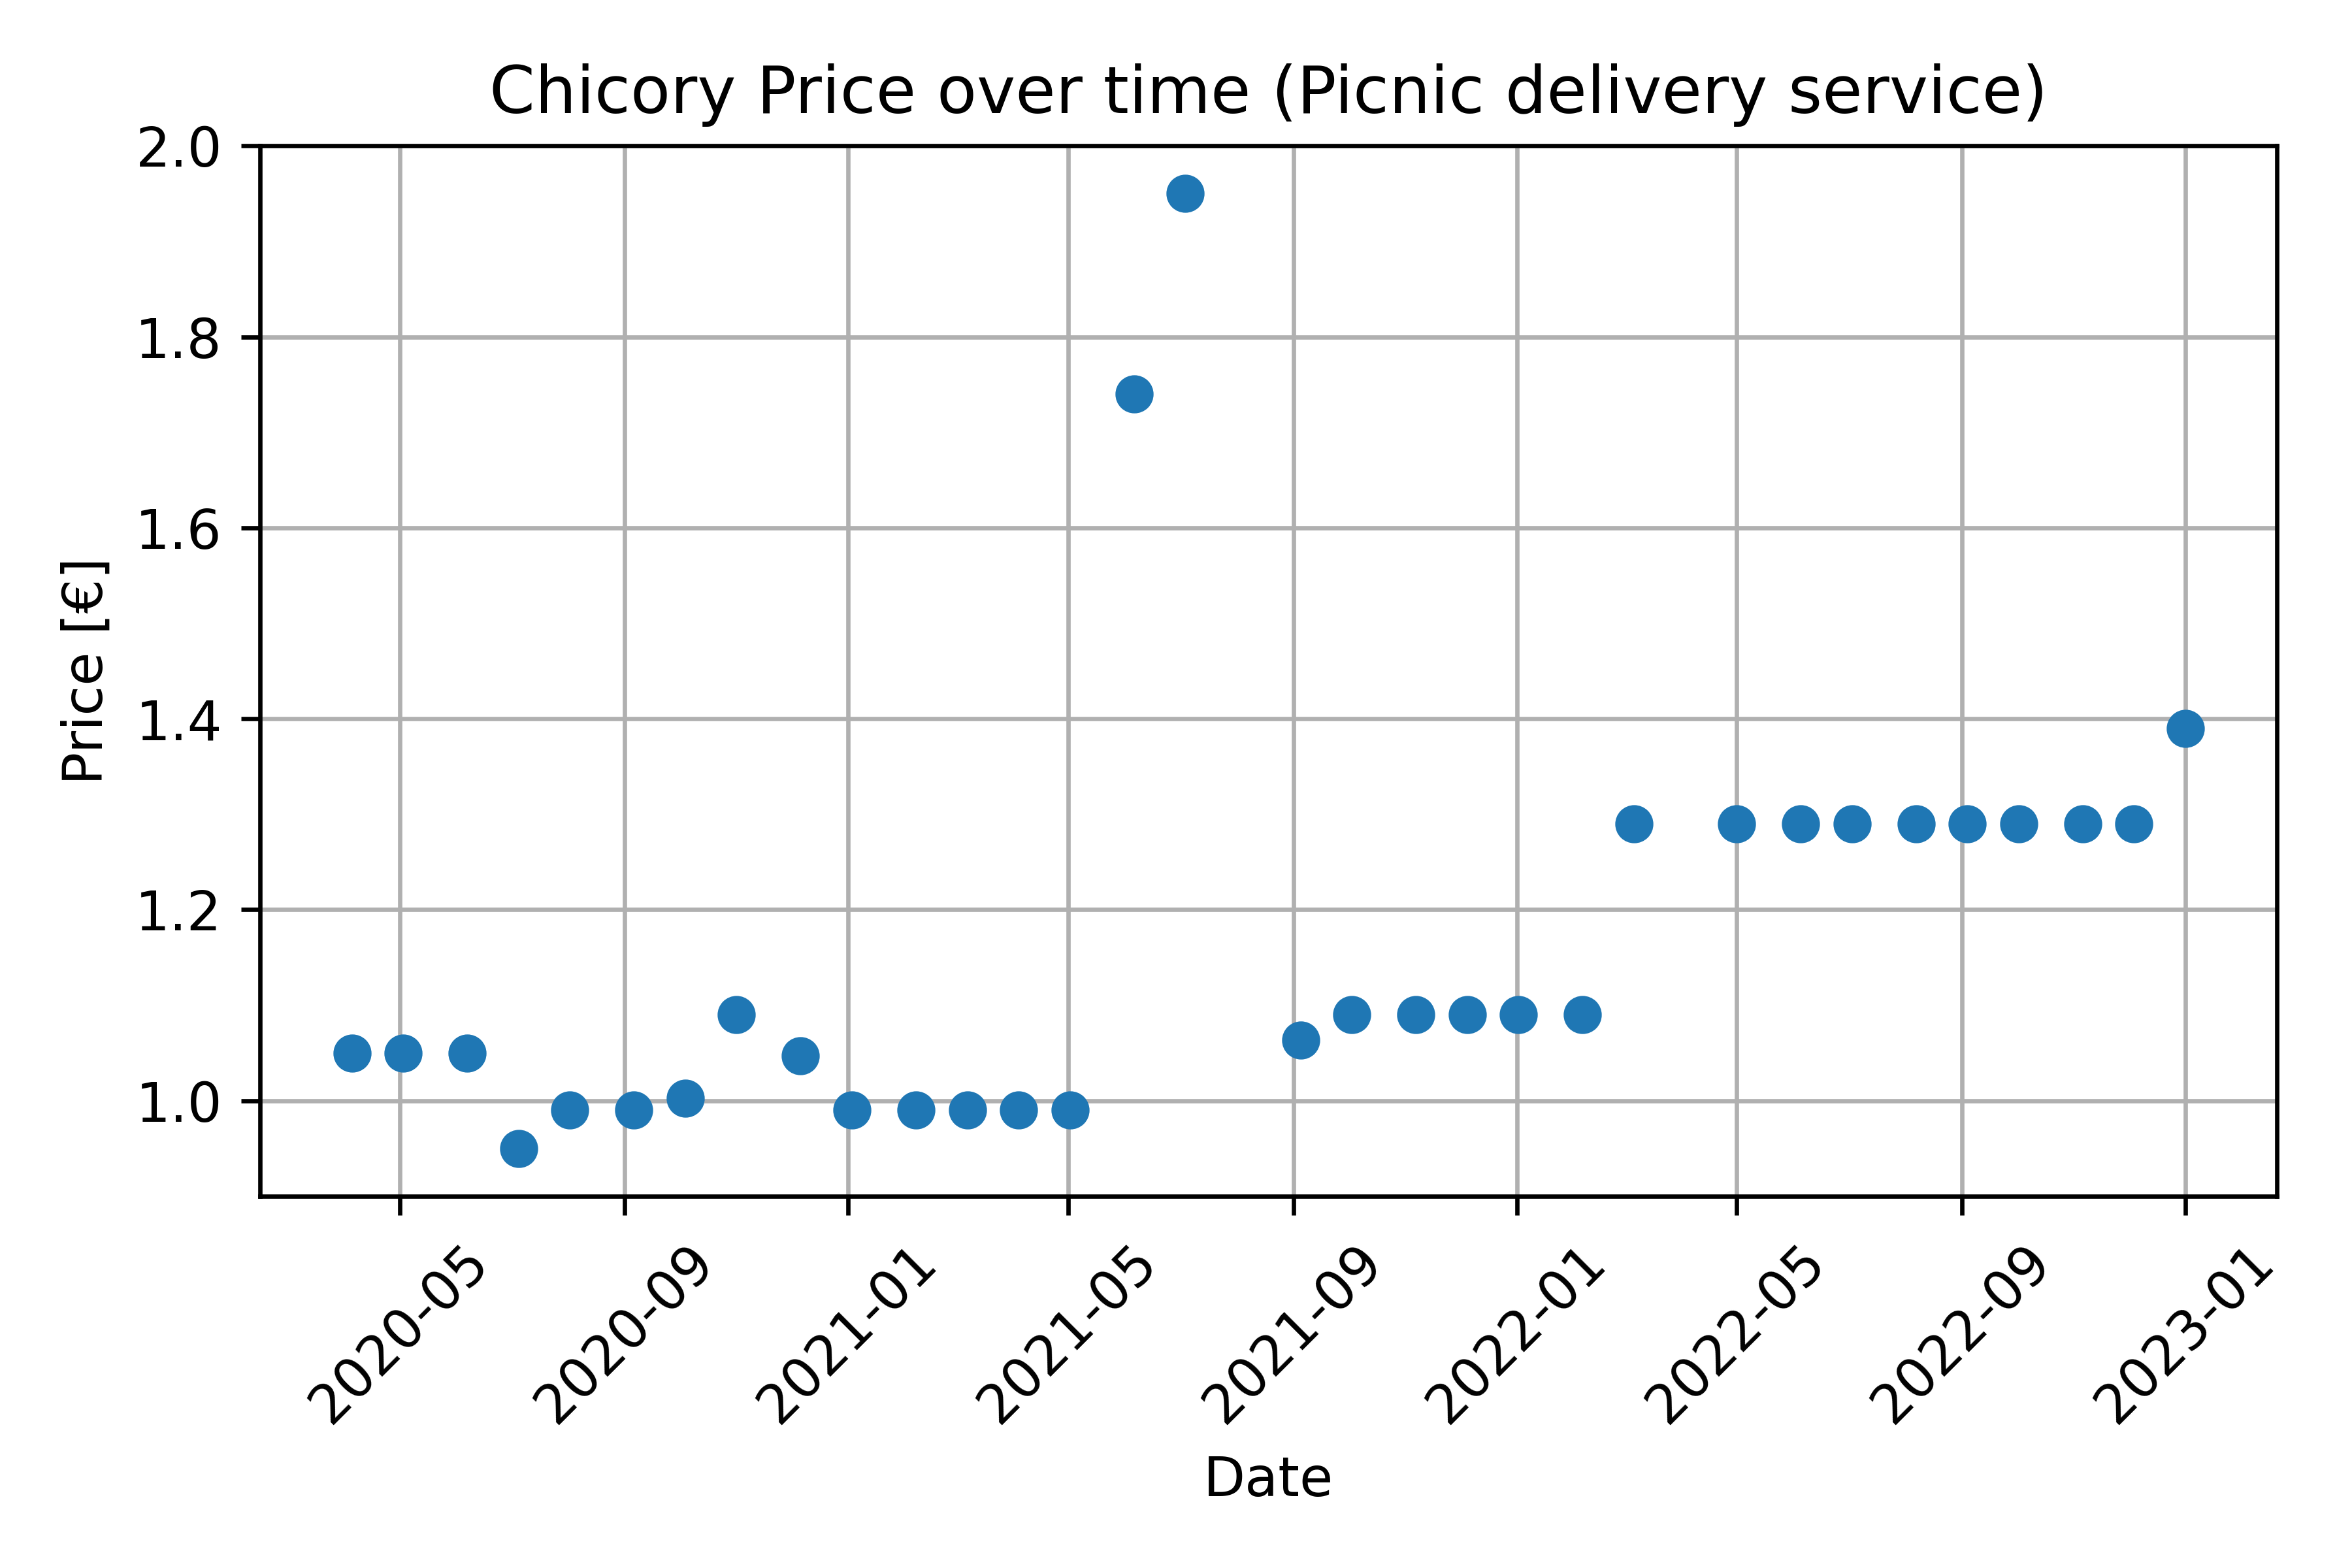 Chicory prices over time